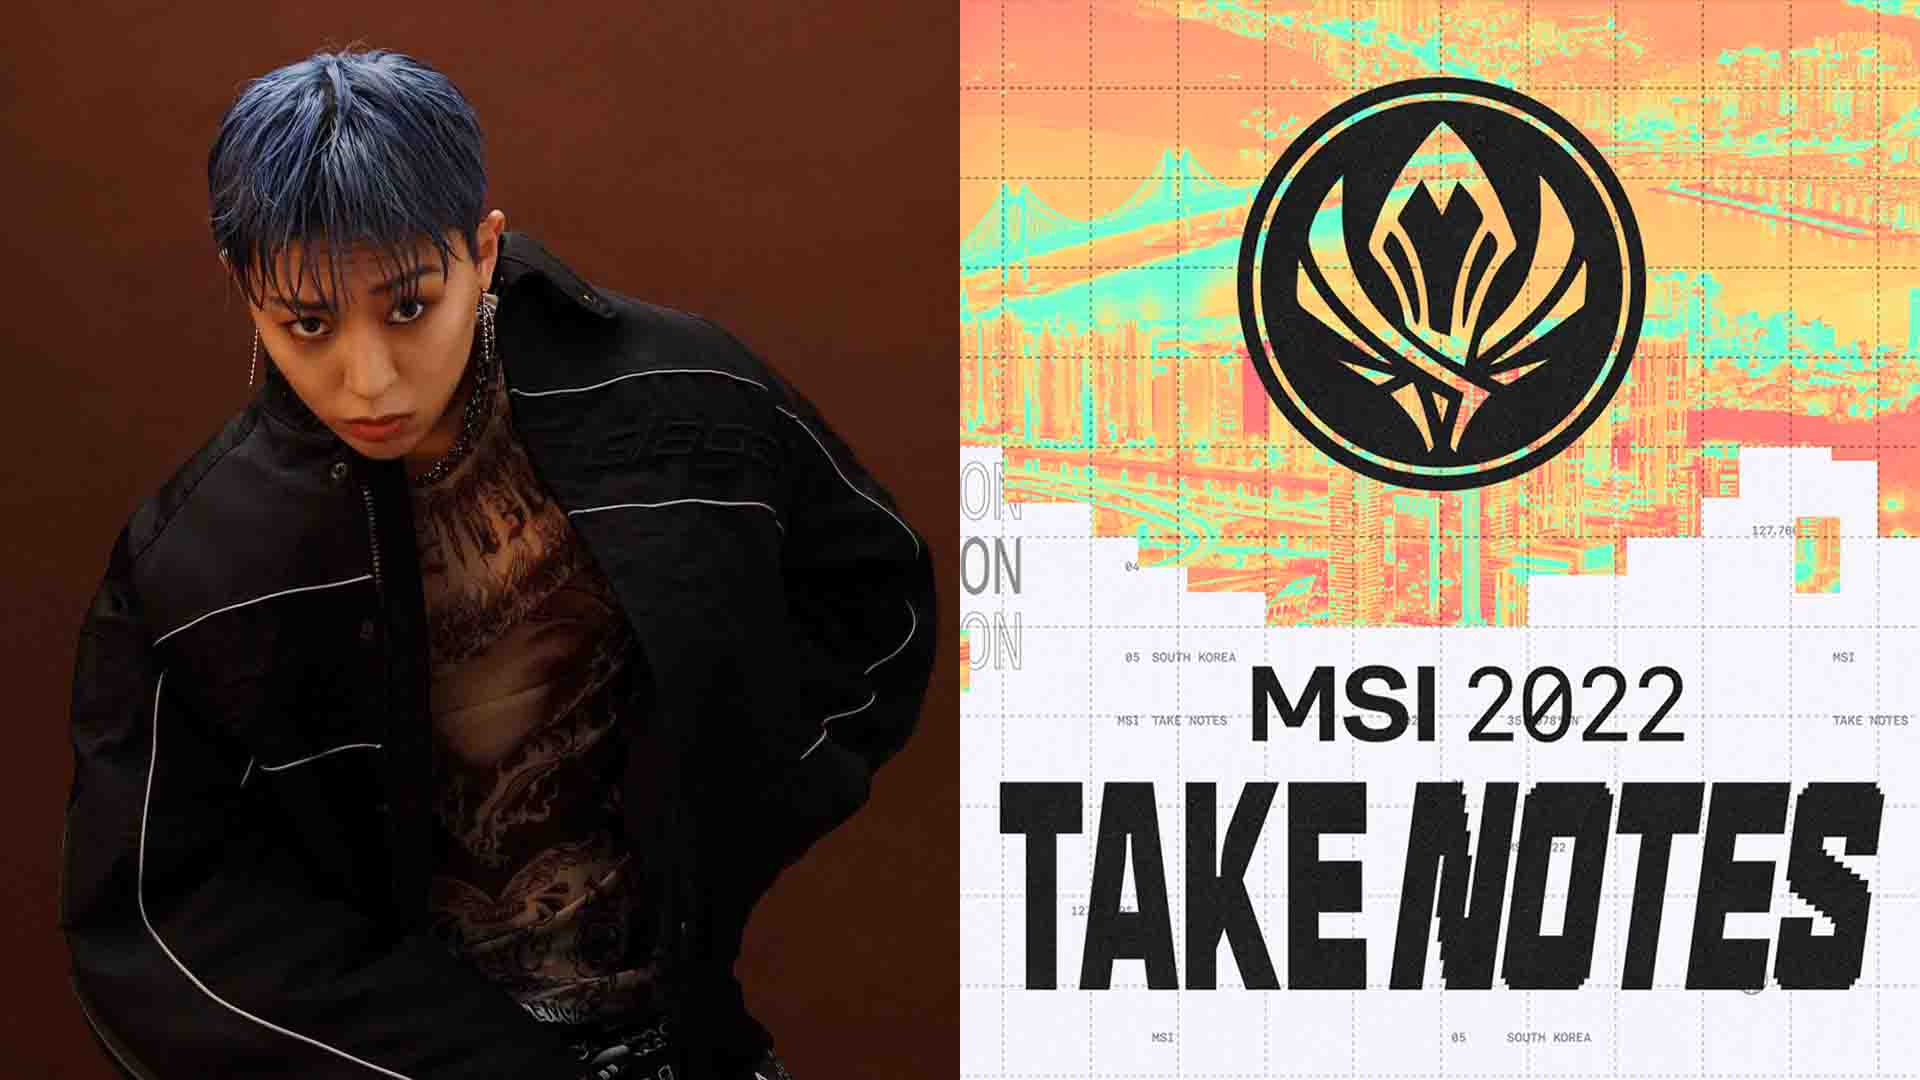 MSI 2022 song Set It Off features Korean artistes DPR LIVE and DPR CLINE ONE Esports